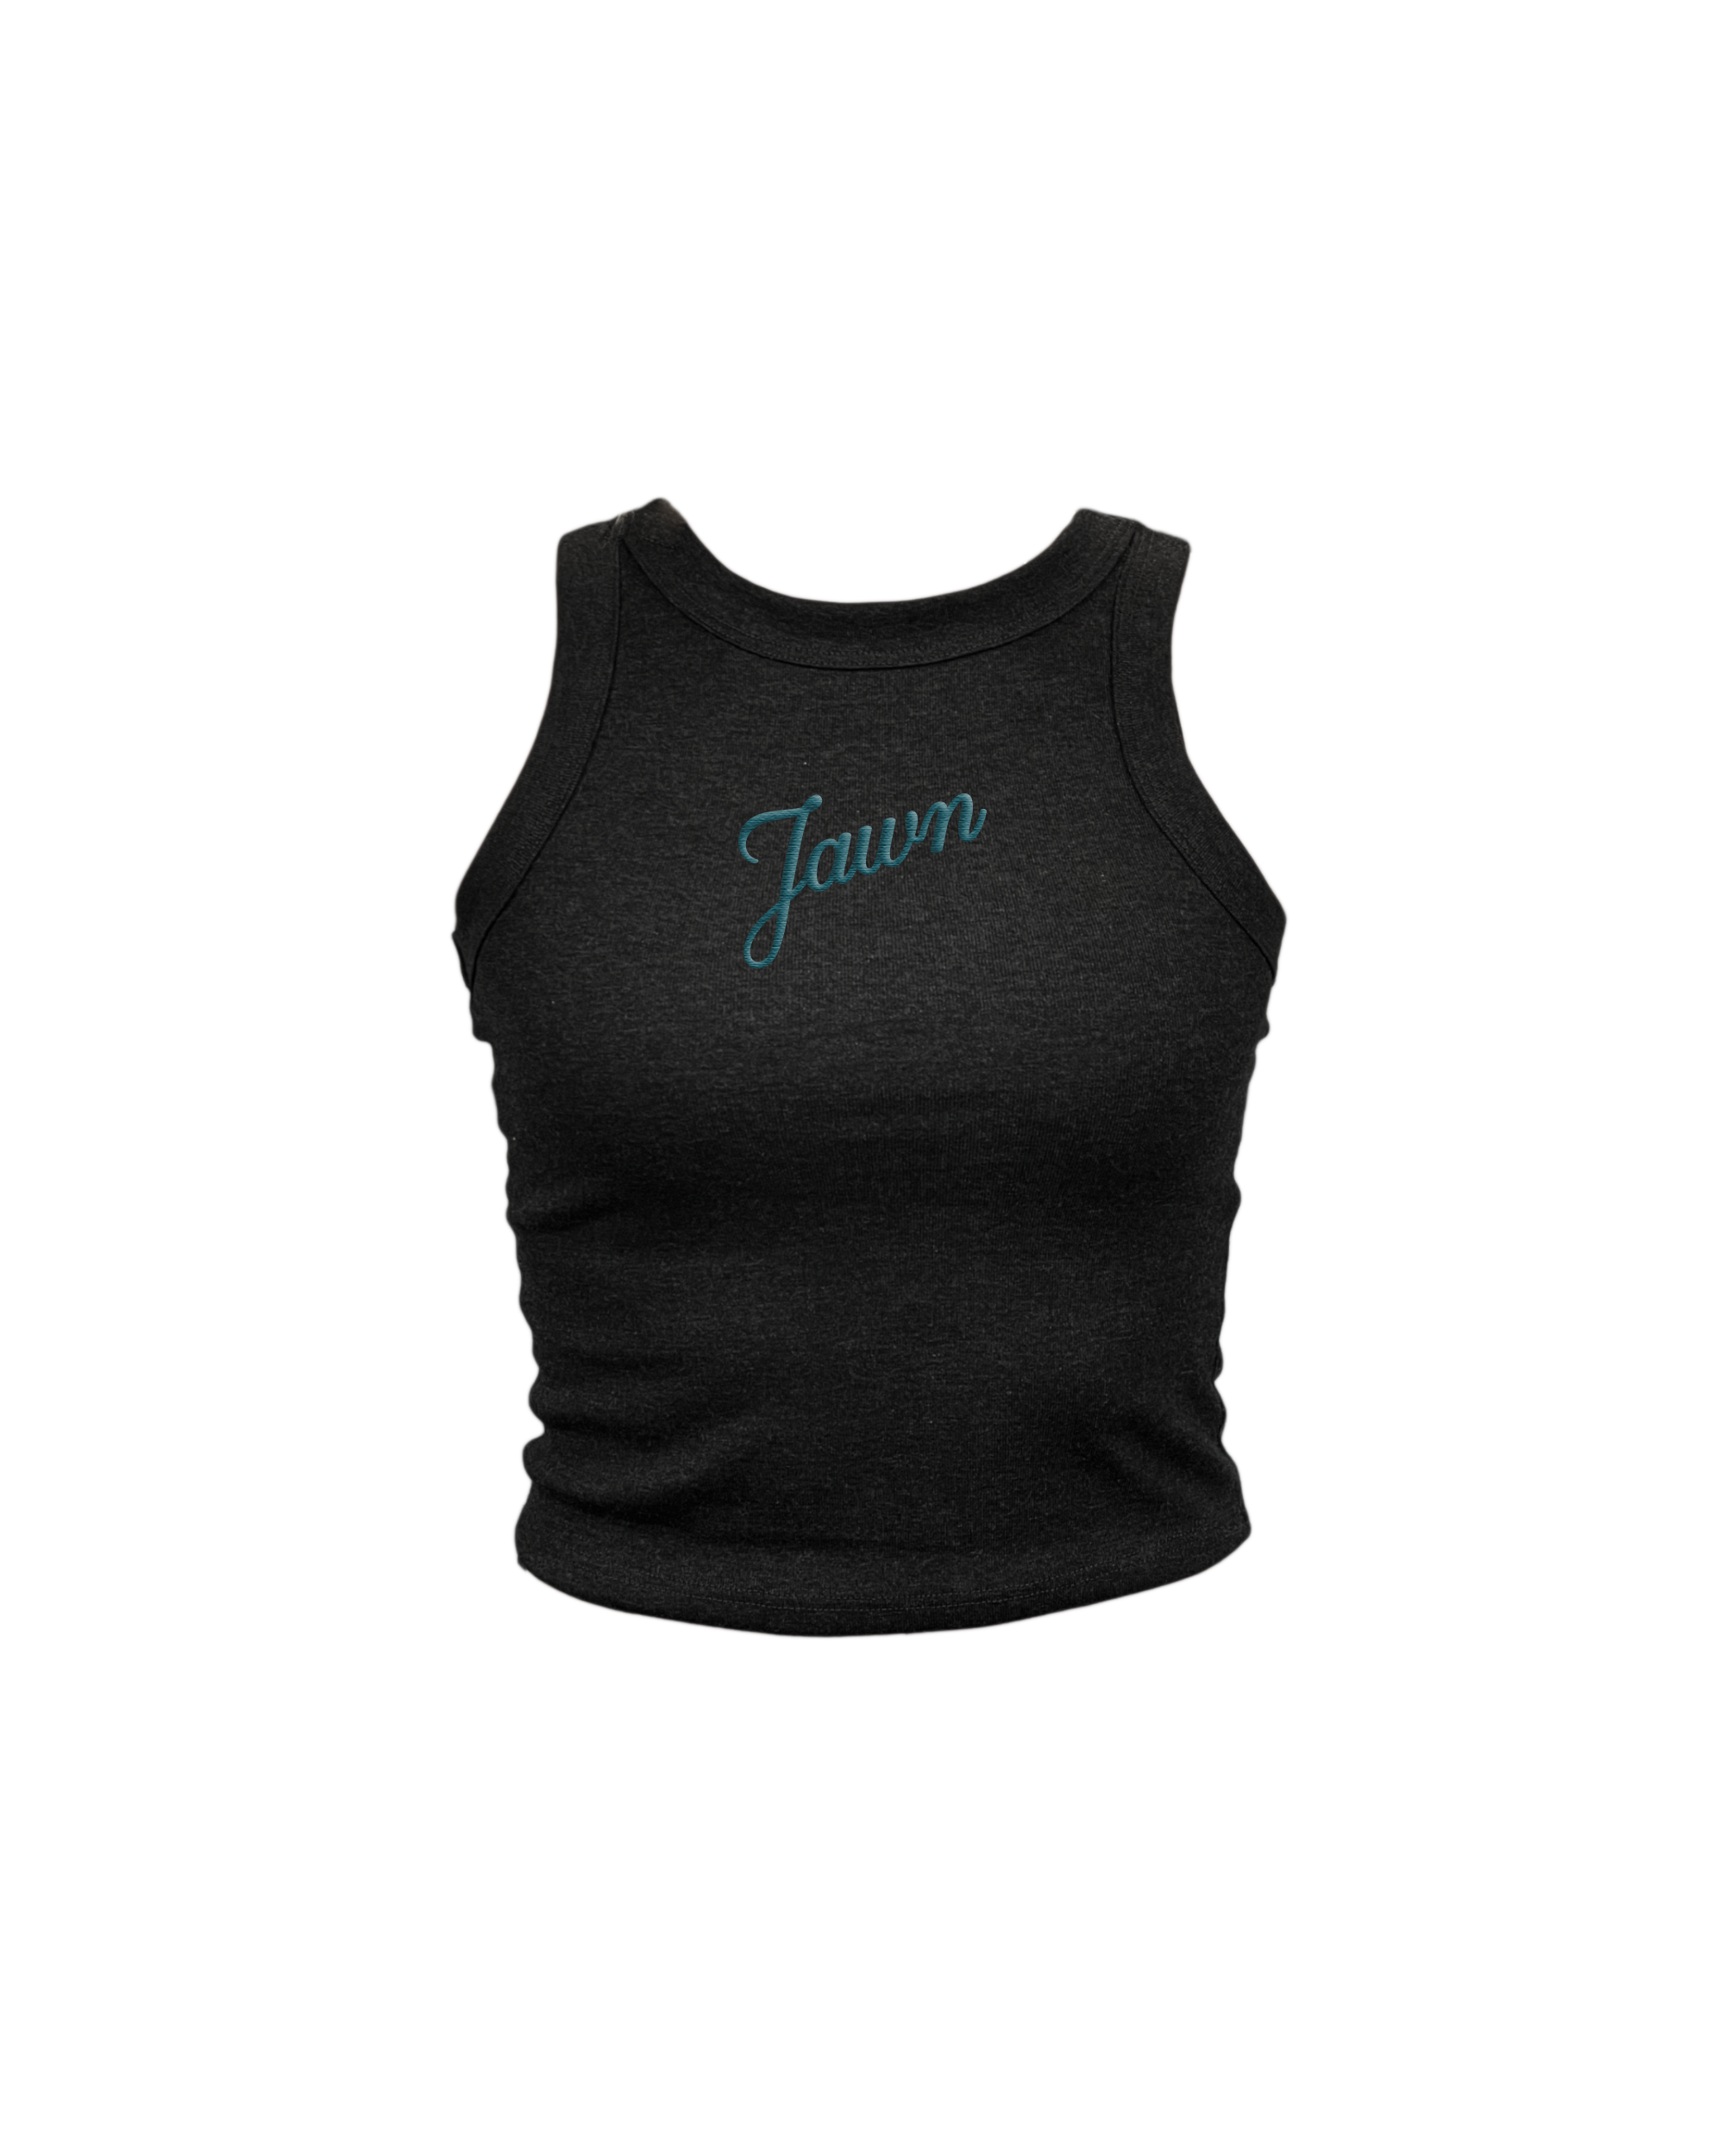 Jawn Embroidered High Neck Tank